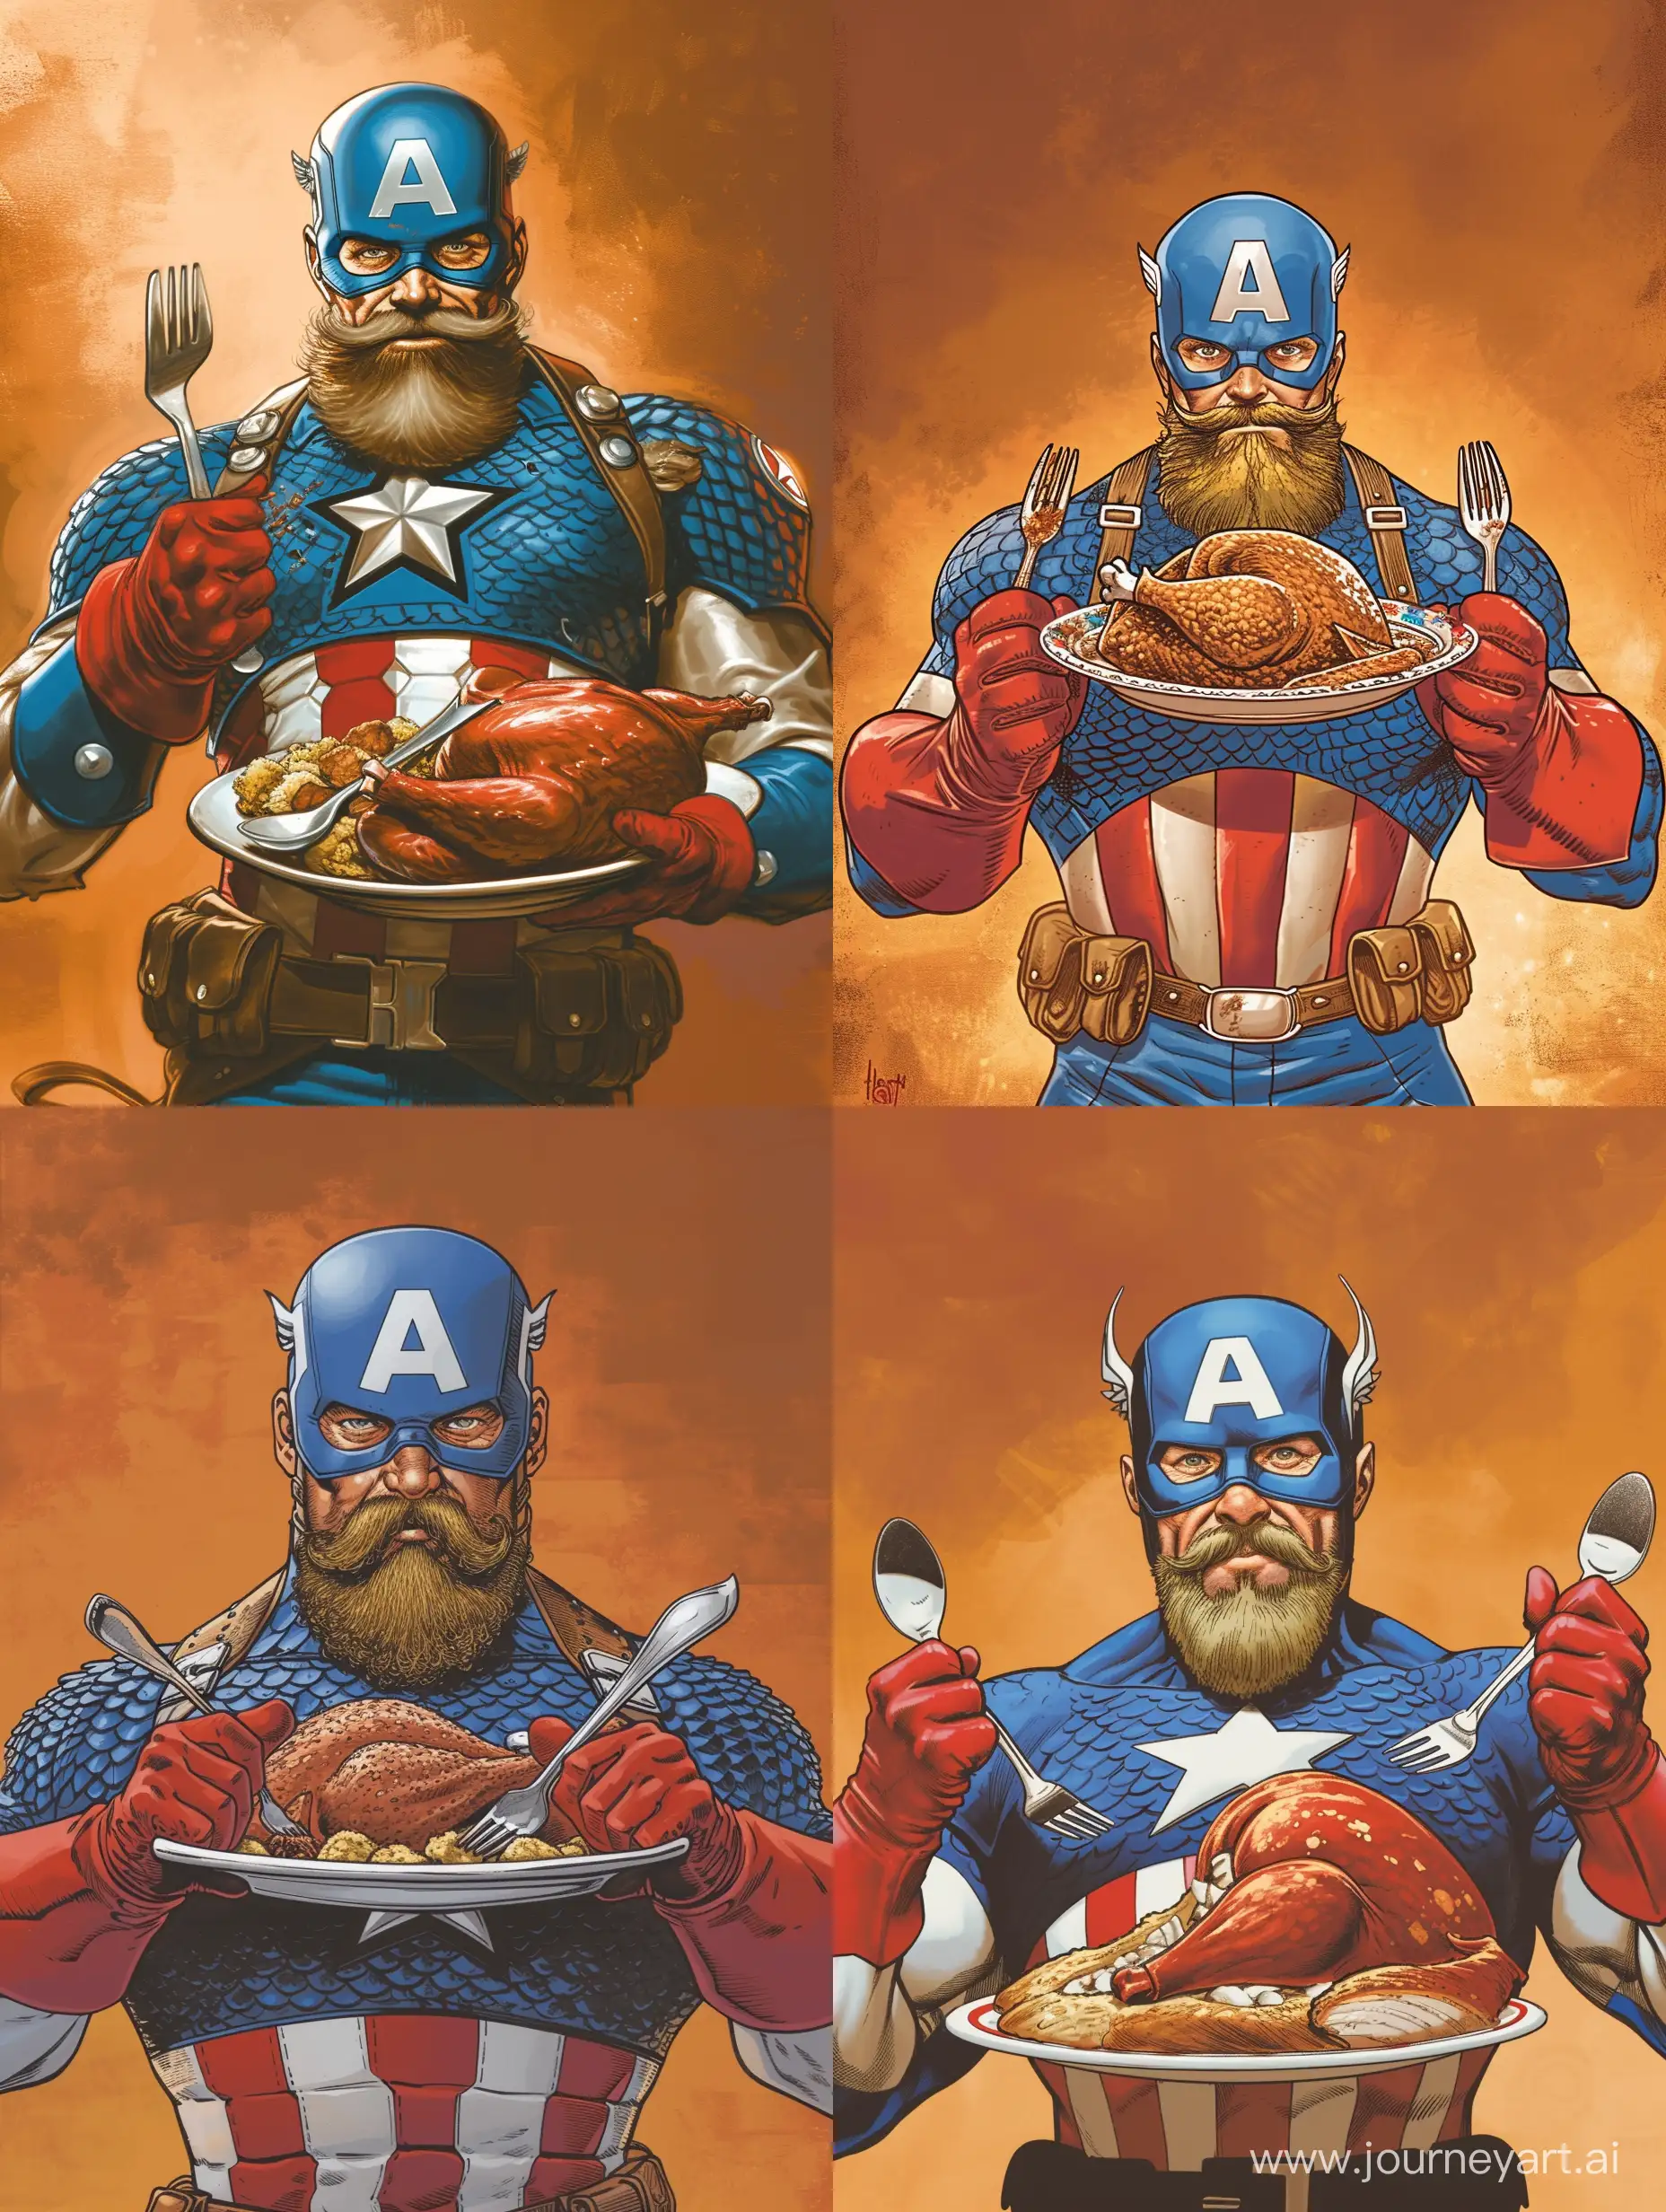 Captain America, a character from Marvel comics, is shown holding a plate of turkey with both hands. He is wearing his signature red, white, and blue suit with a blue helmet and a thick beard. He has a mustache and is holding a fork and a spoon. The background features a warm orange hue.